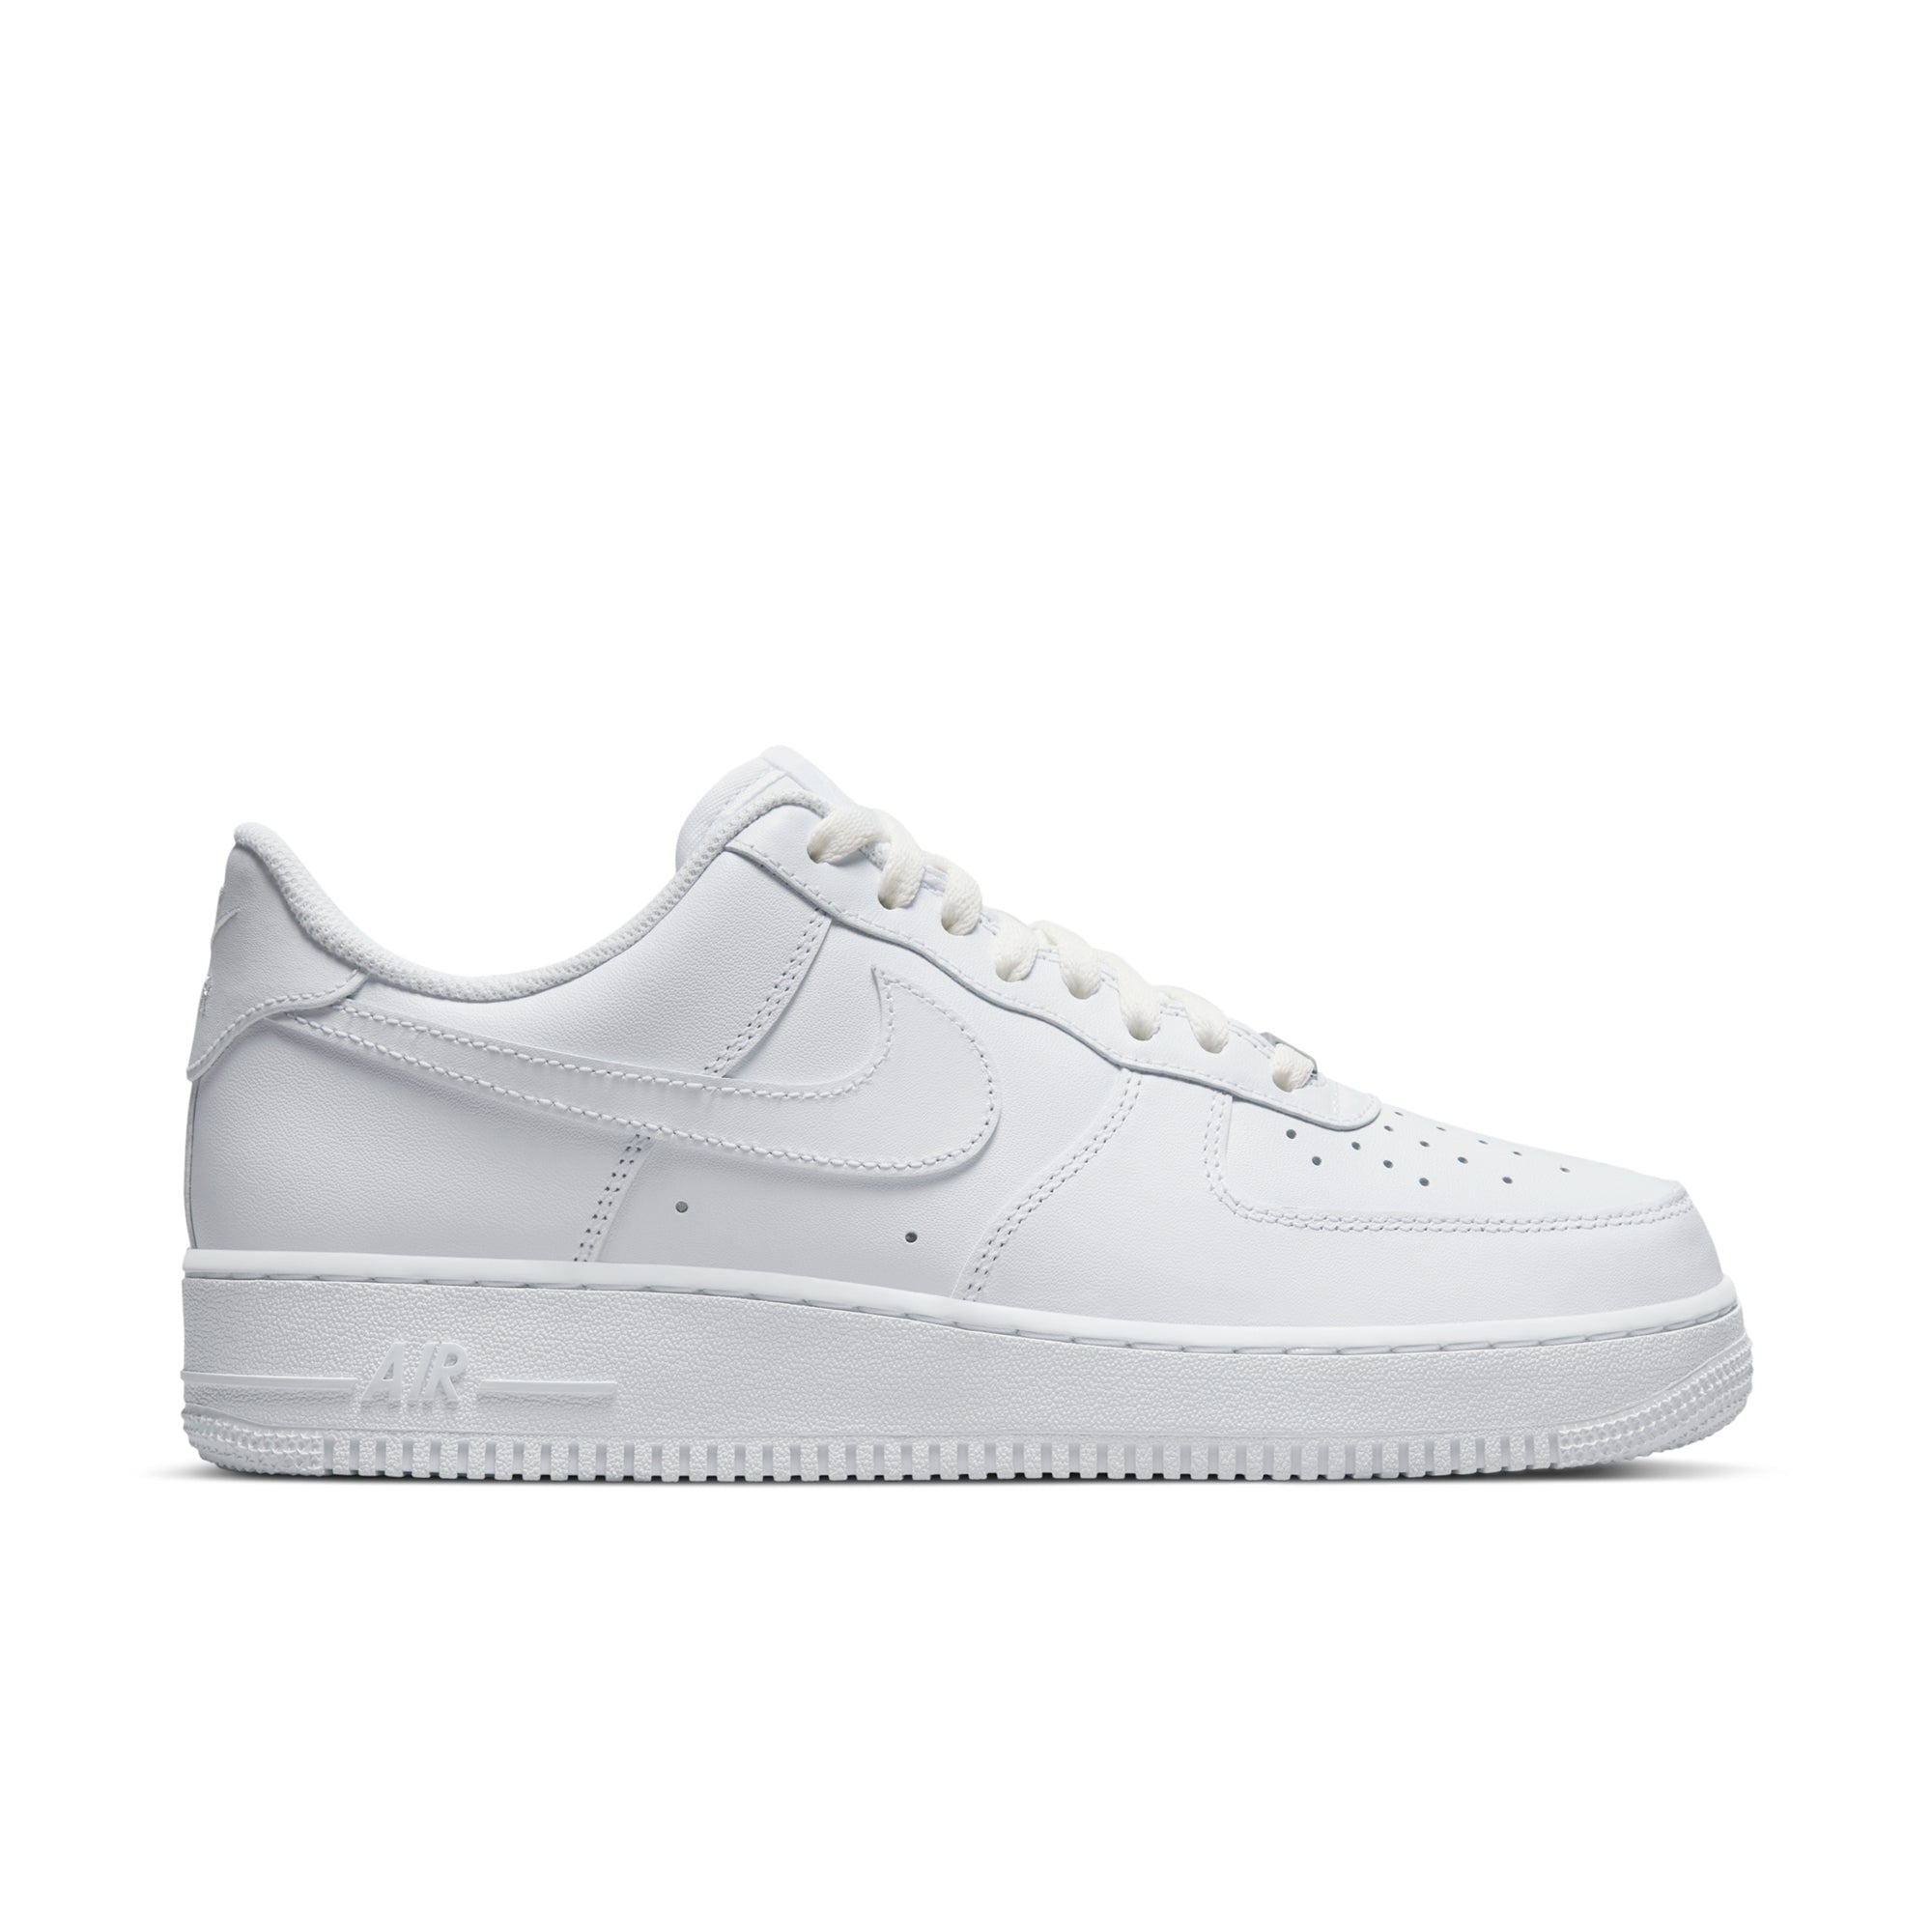 nike air force 1 low white and black Nike Air Force 1 Low '07 White | CW2288-111 42.5 - Livrare express 24 ore